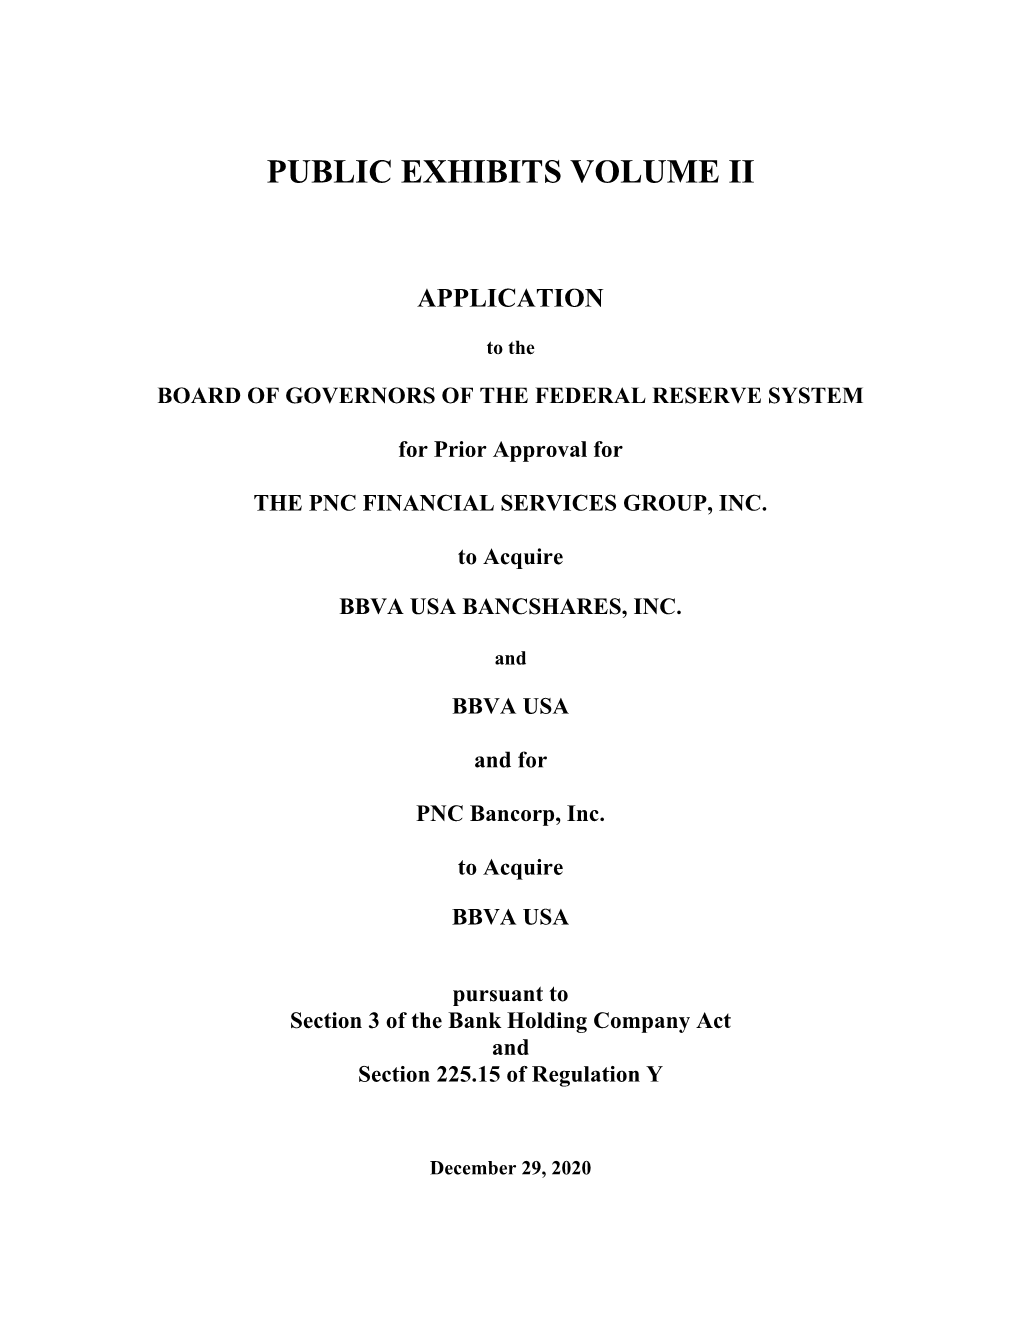 Public Exhibits to Application by PNC Financial Services Group, Inc. to Acquire BBVA USA Banchshares, Inc. Volume II